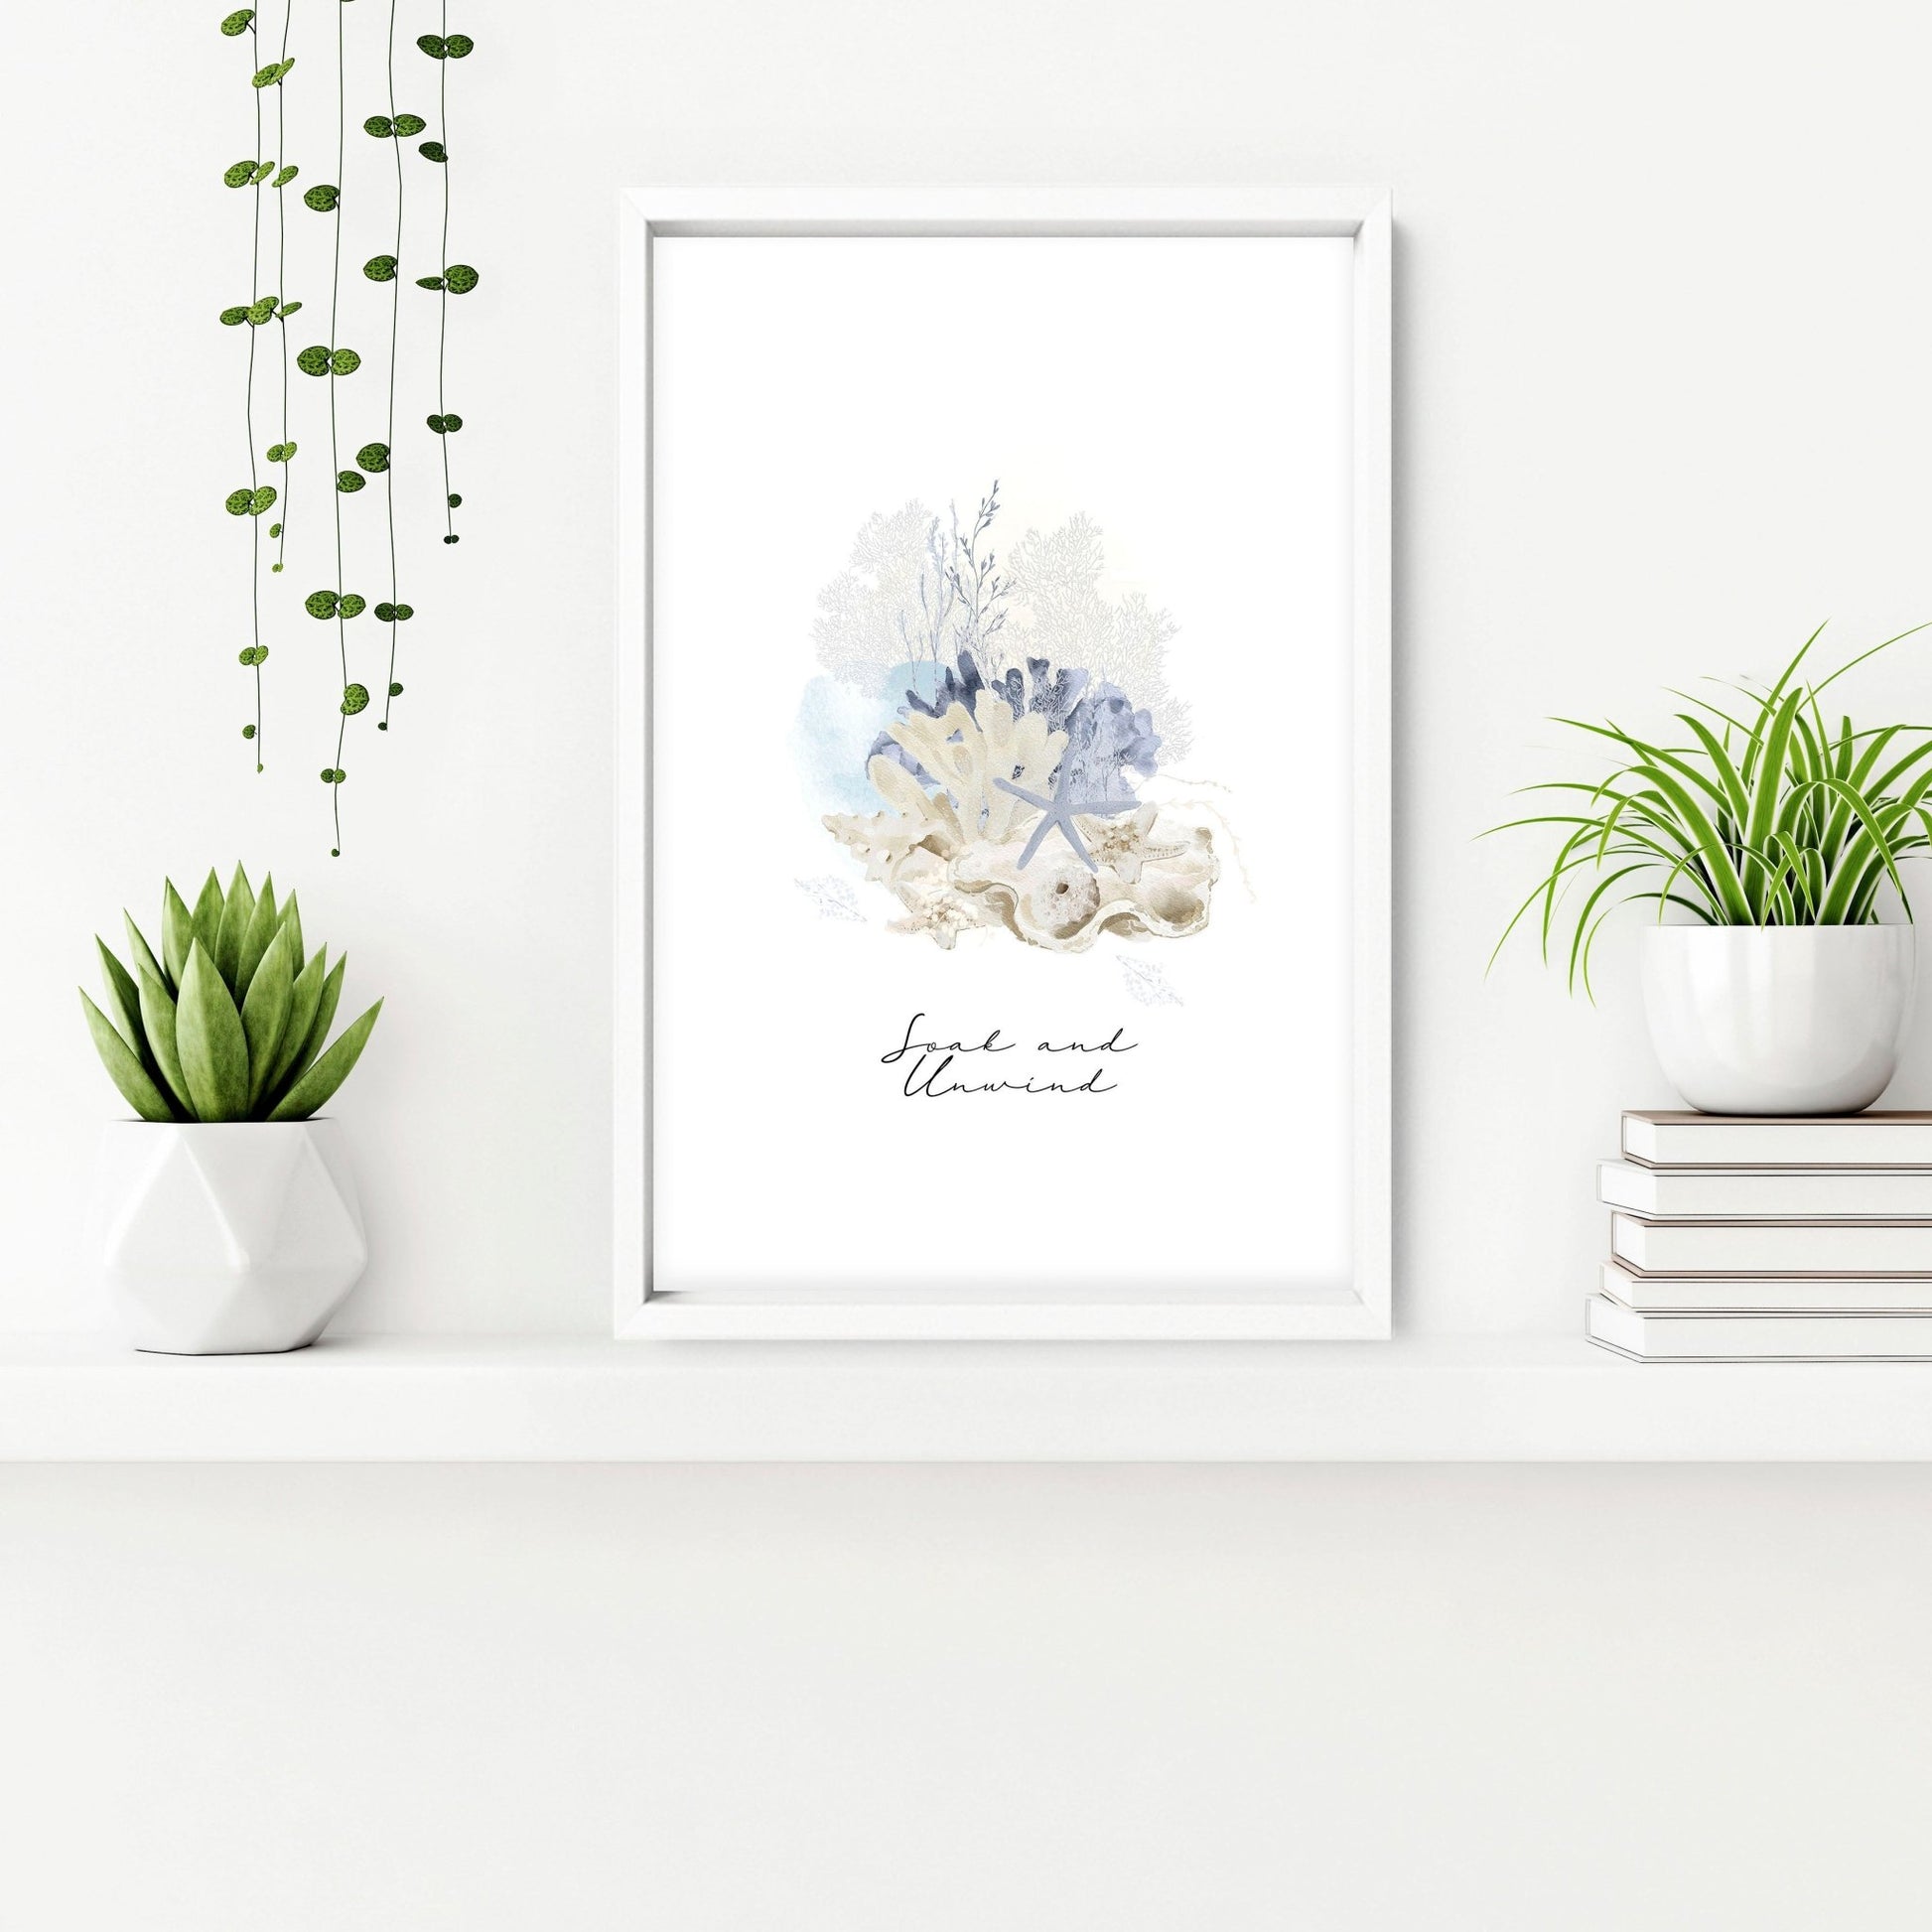 Pictures for bathrooms | set of 3 Coastal wall prints